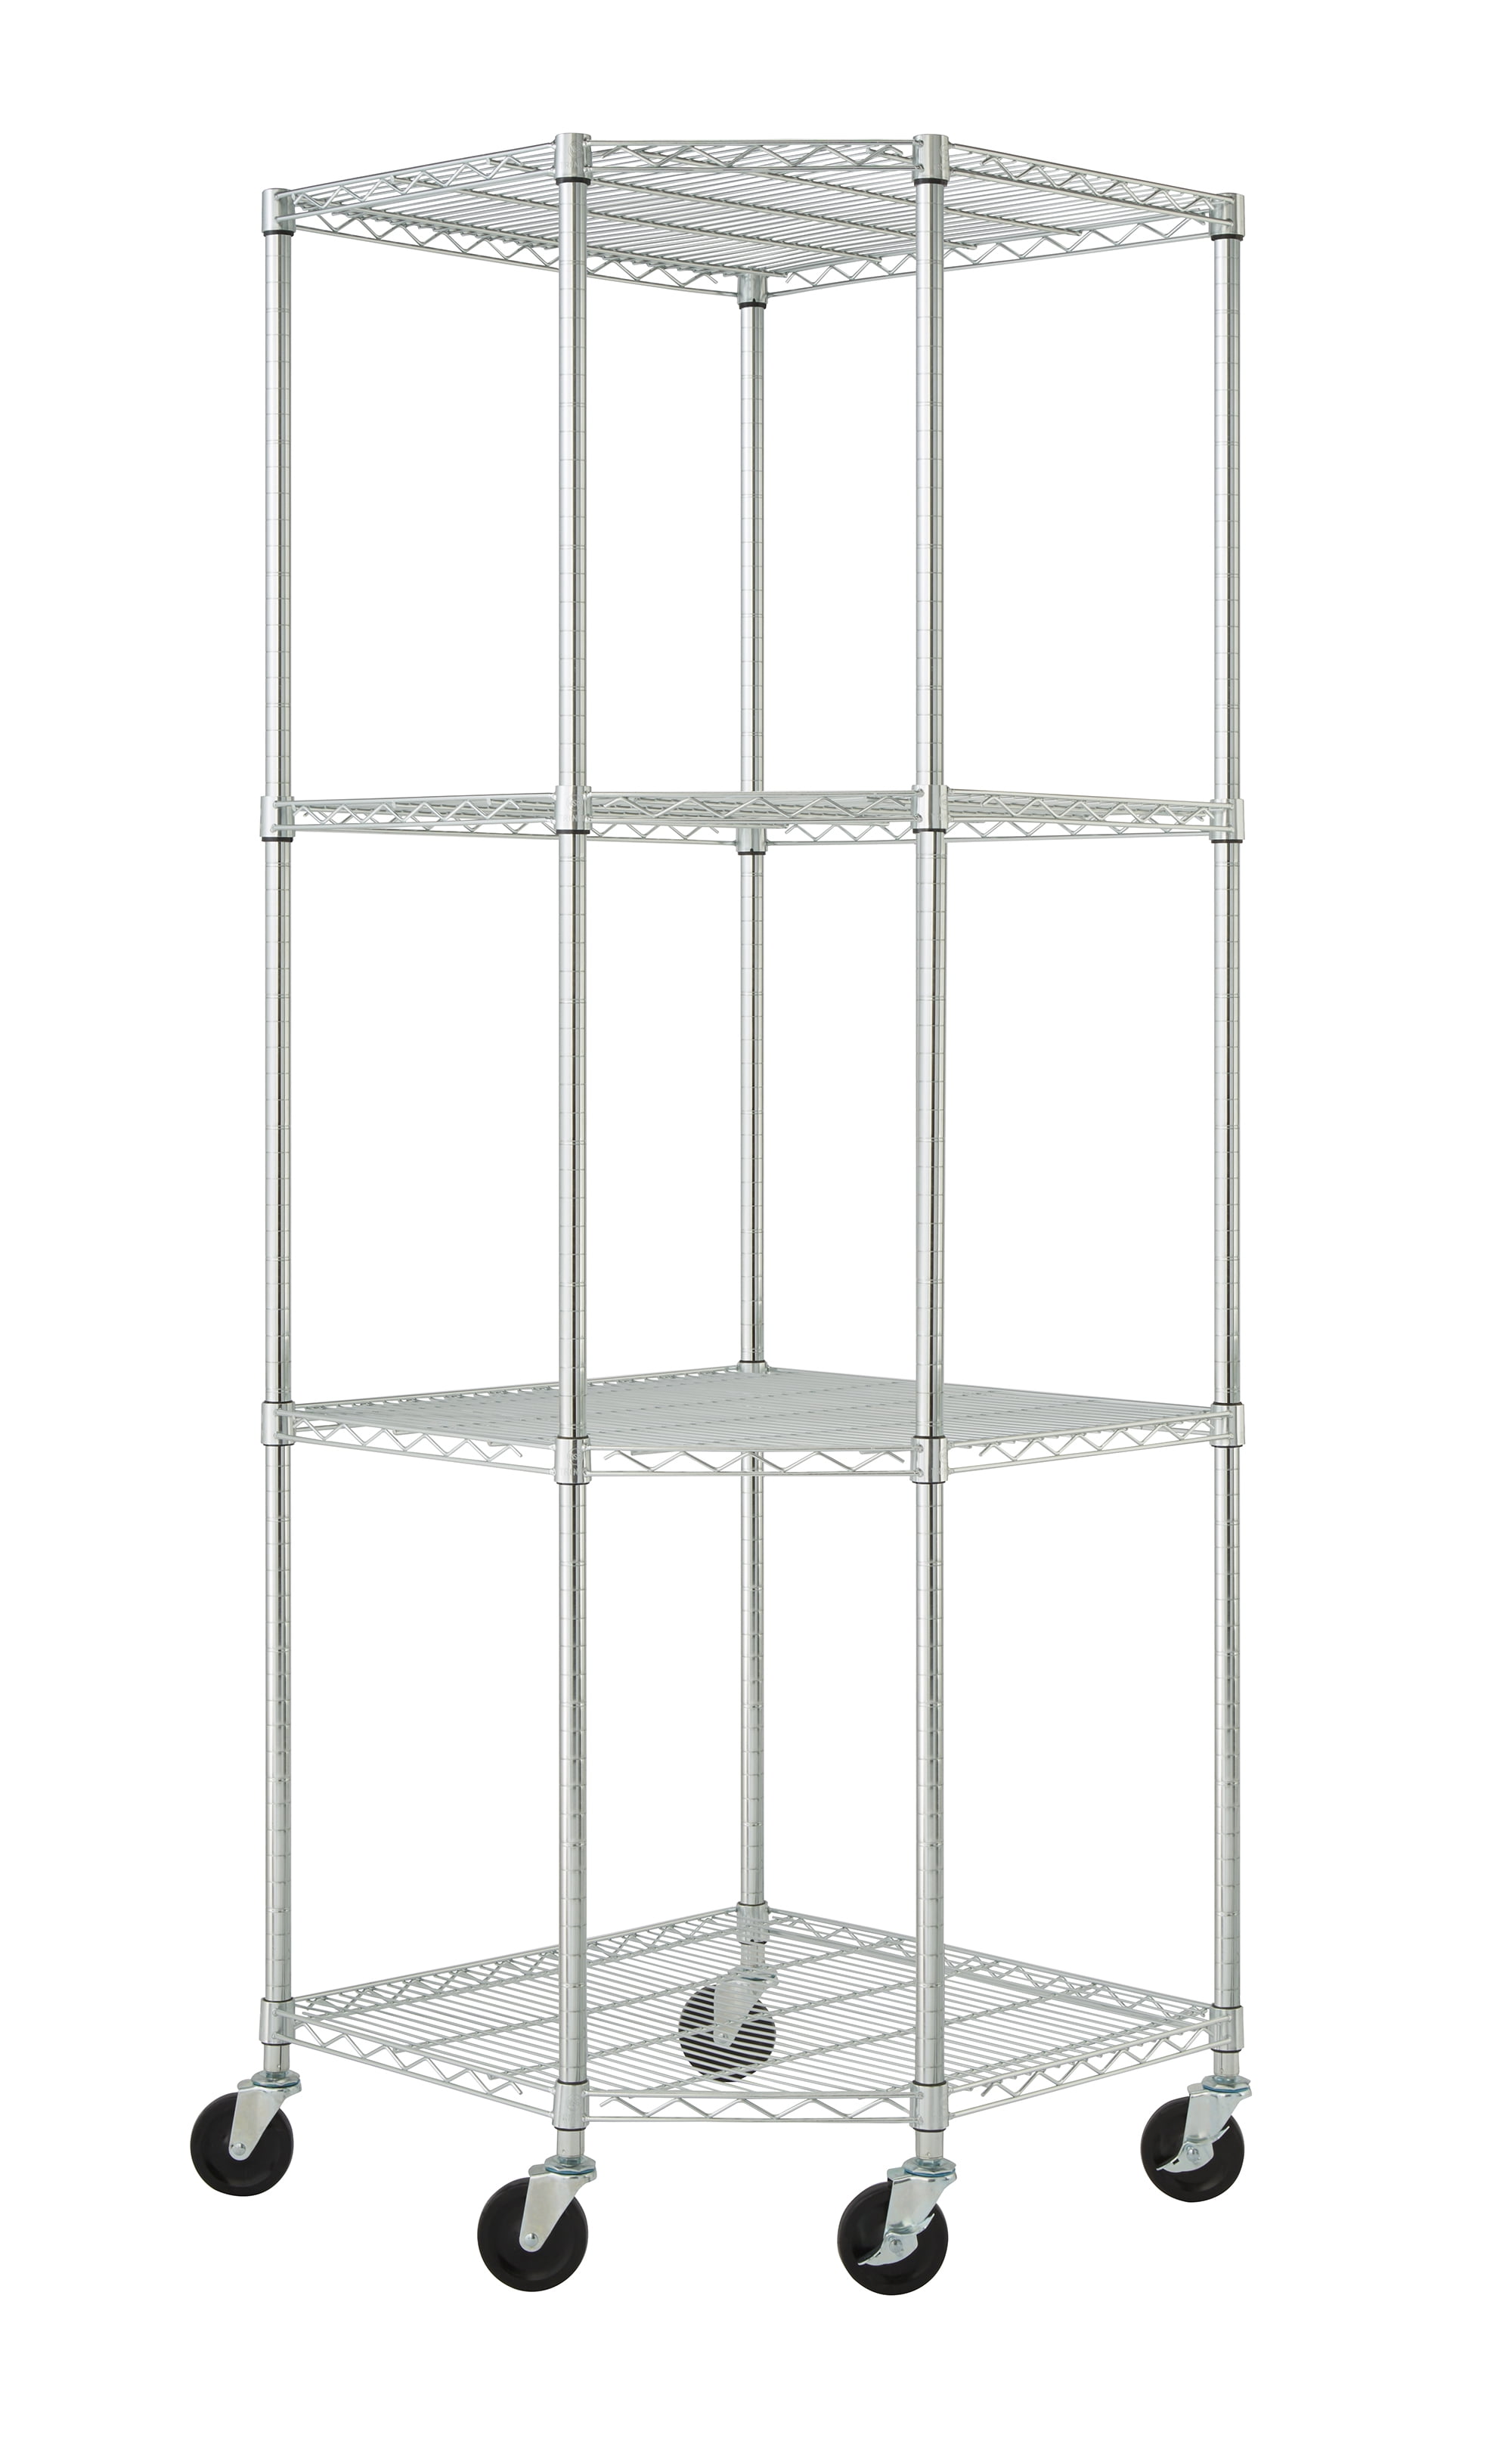 5 Shelf Nsf Wire Shelving Unit, Trinity 60 Inch 5 Tier Wire Shelving Rack With Wheels In Black